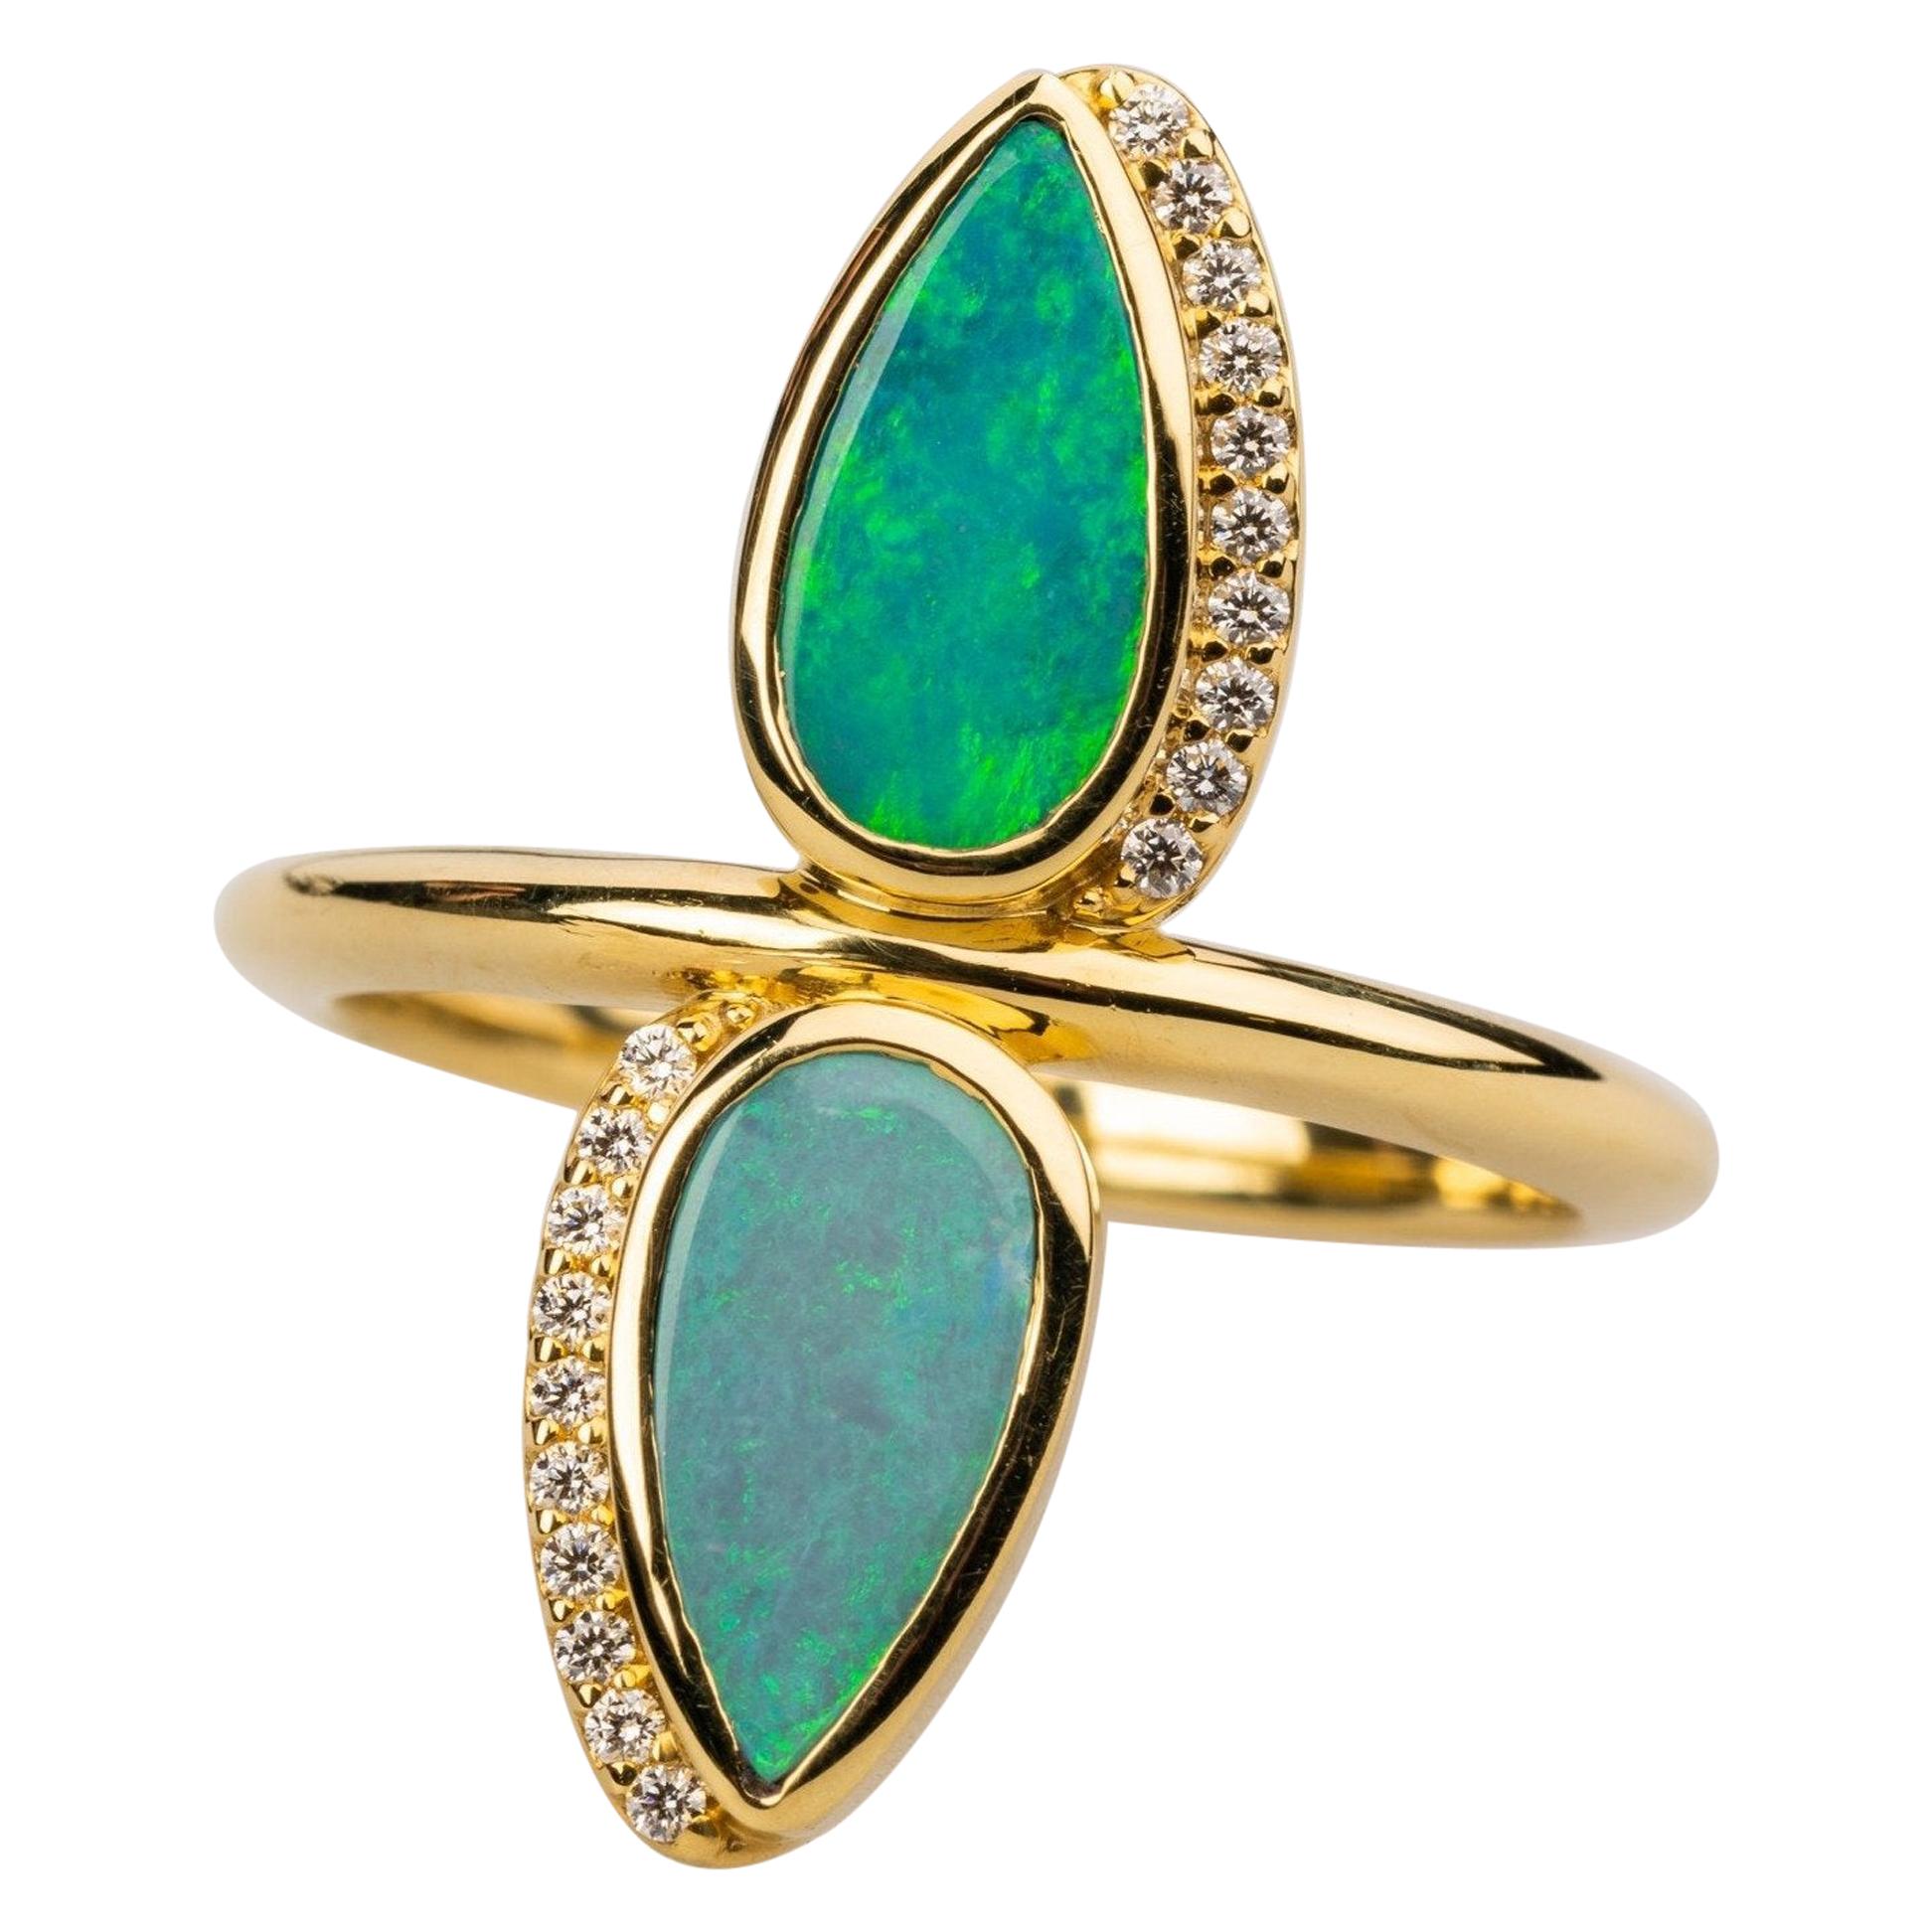 18 Karat Yellow Gold Double Pear Shape Opal Doublet Ring with White Diamonds